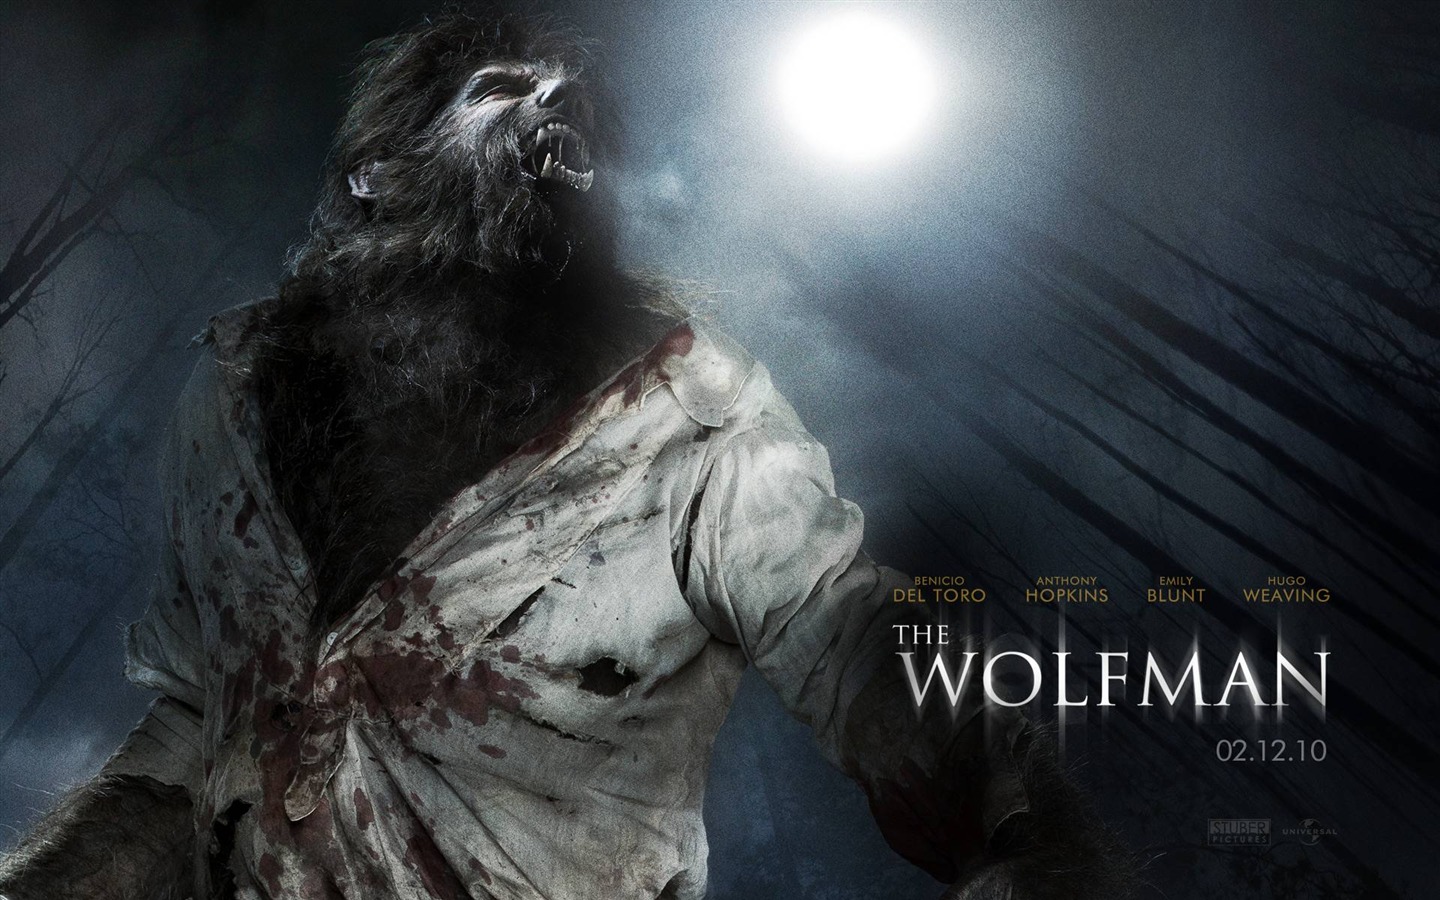 The Wolfman Movie Wallpapers #3 - 1440x900